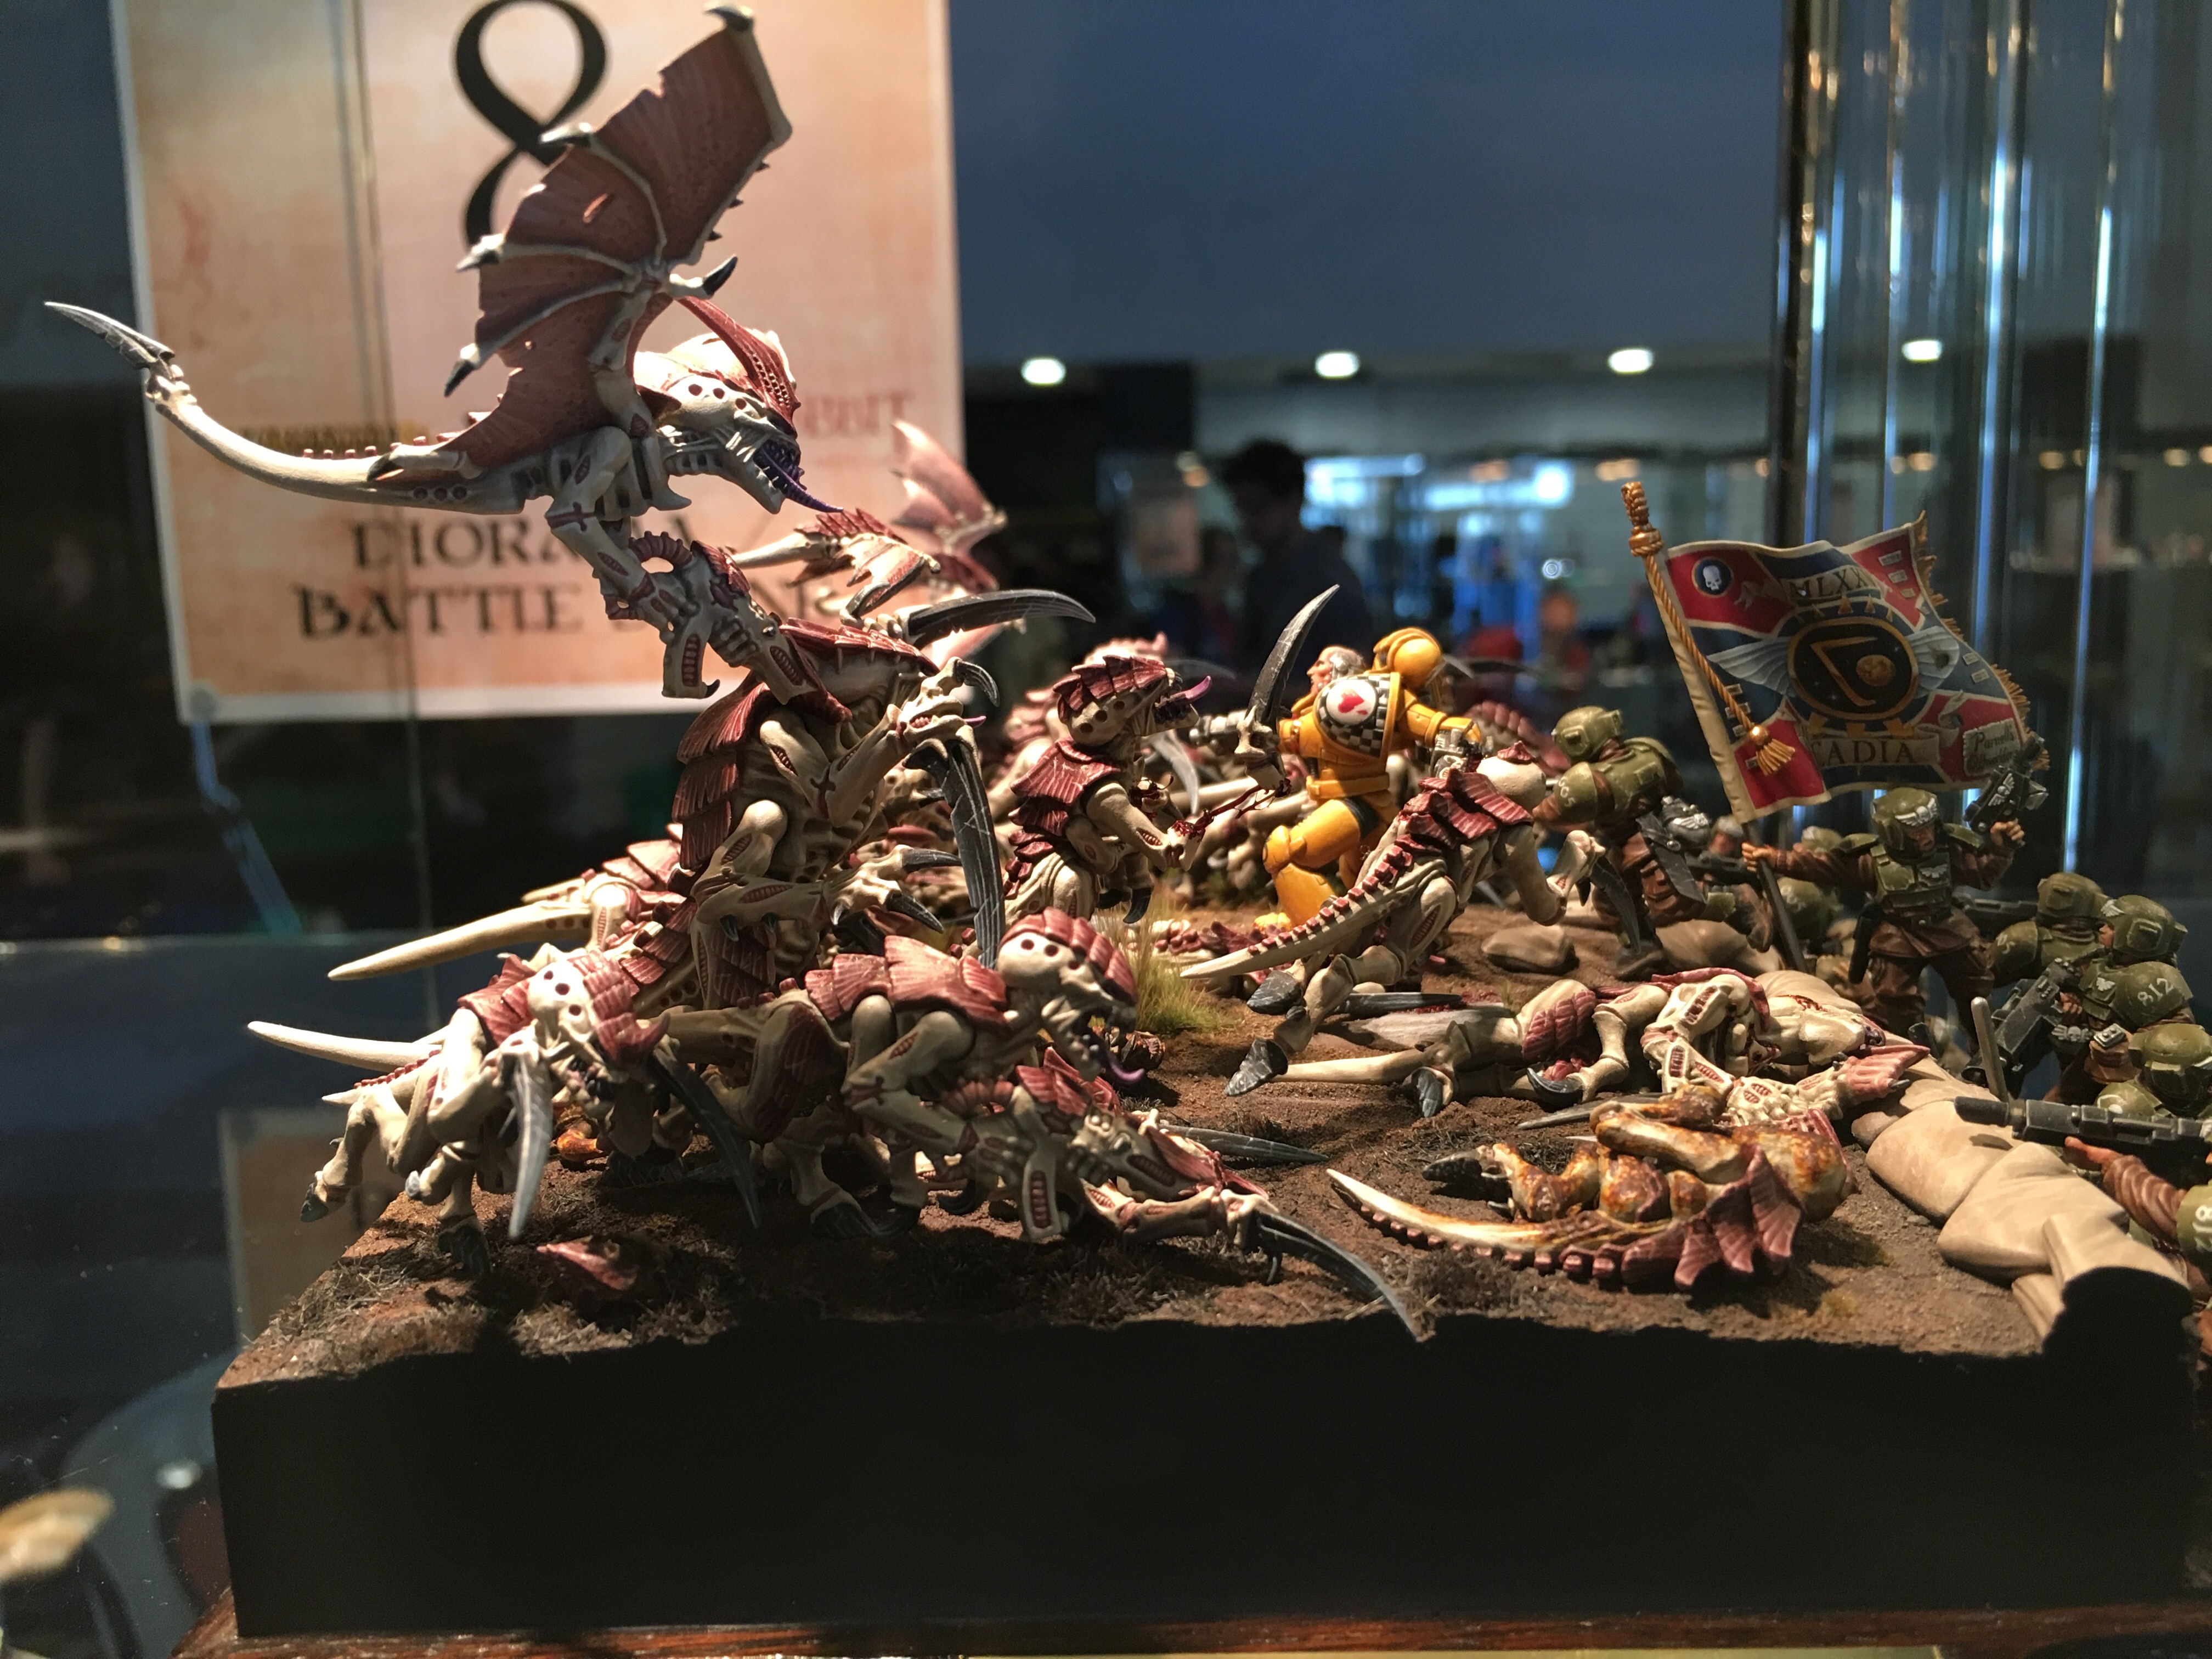 Lemantor Space Marine Sergeant takes on a tyranid hoard.